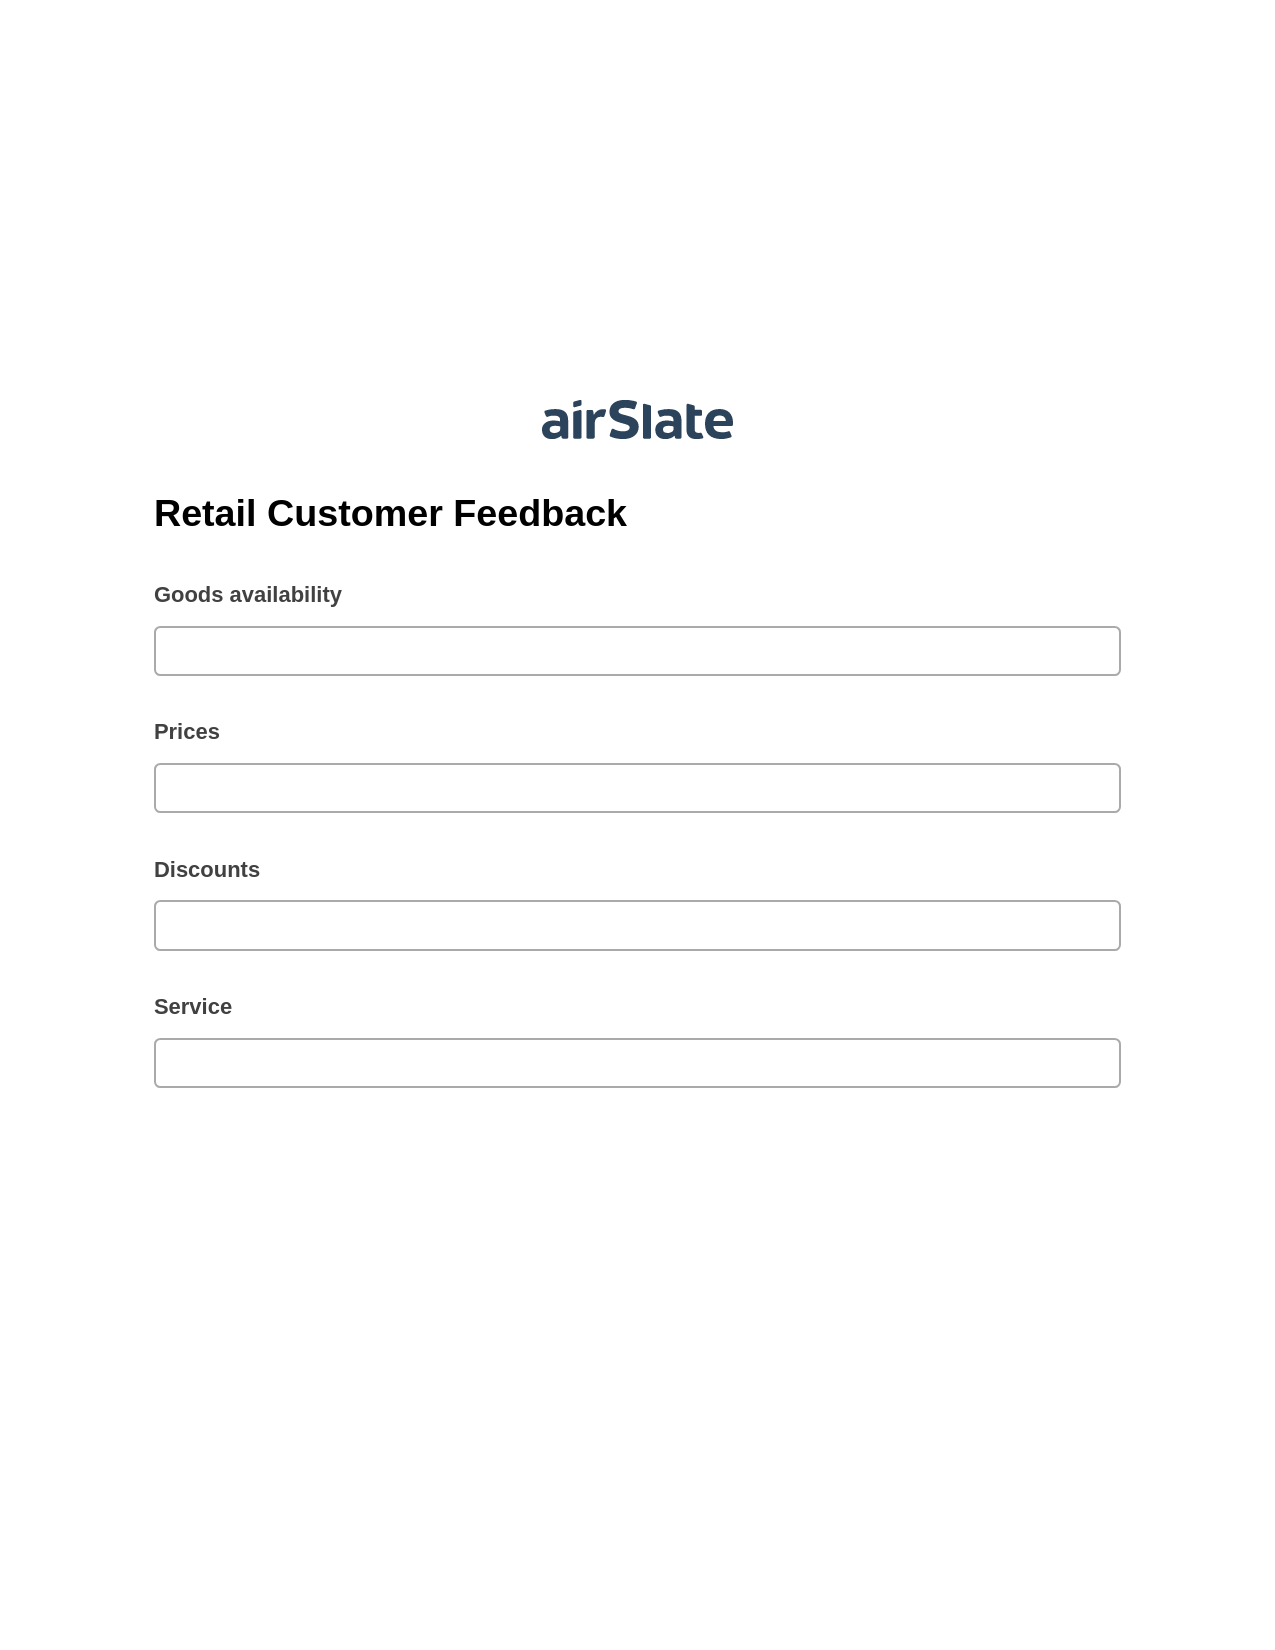 Multirole Retail Customer Feedback Pre-fill Slate from MS Dynamics 365 Records Bot, Email Notification Bot, Box Bot